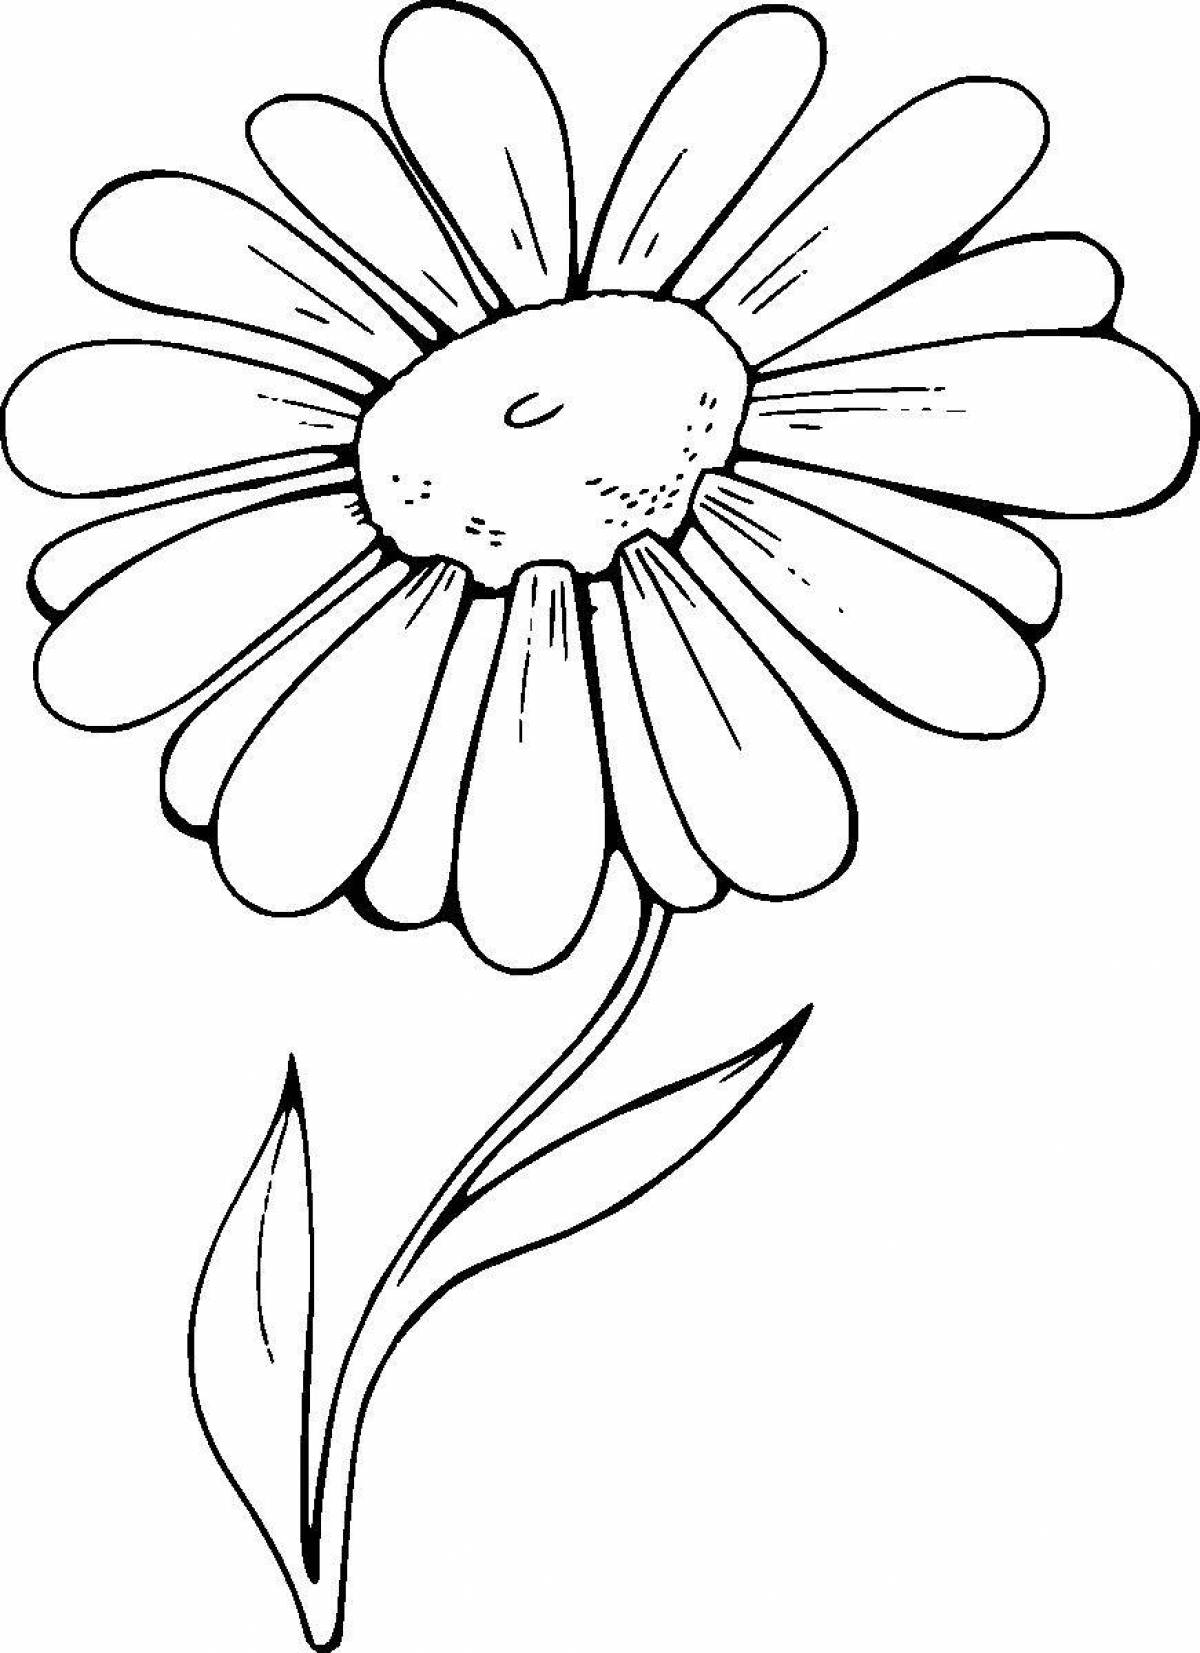 Bright daisy flower coloring book for toddlers